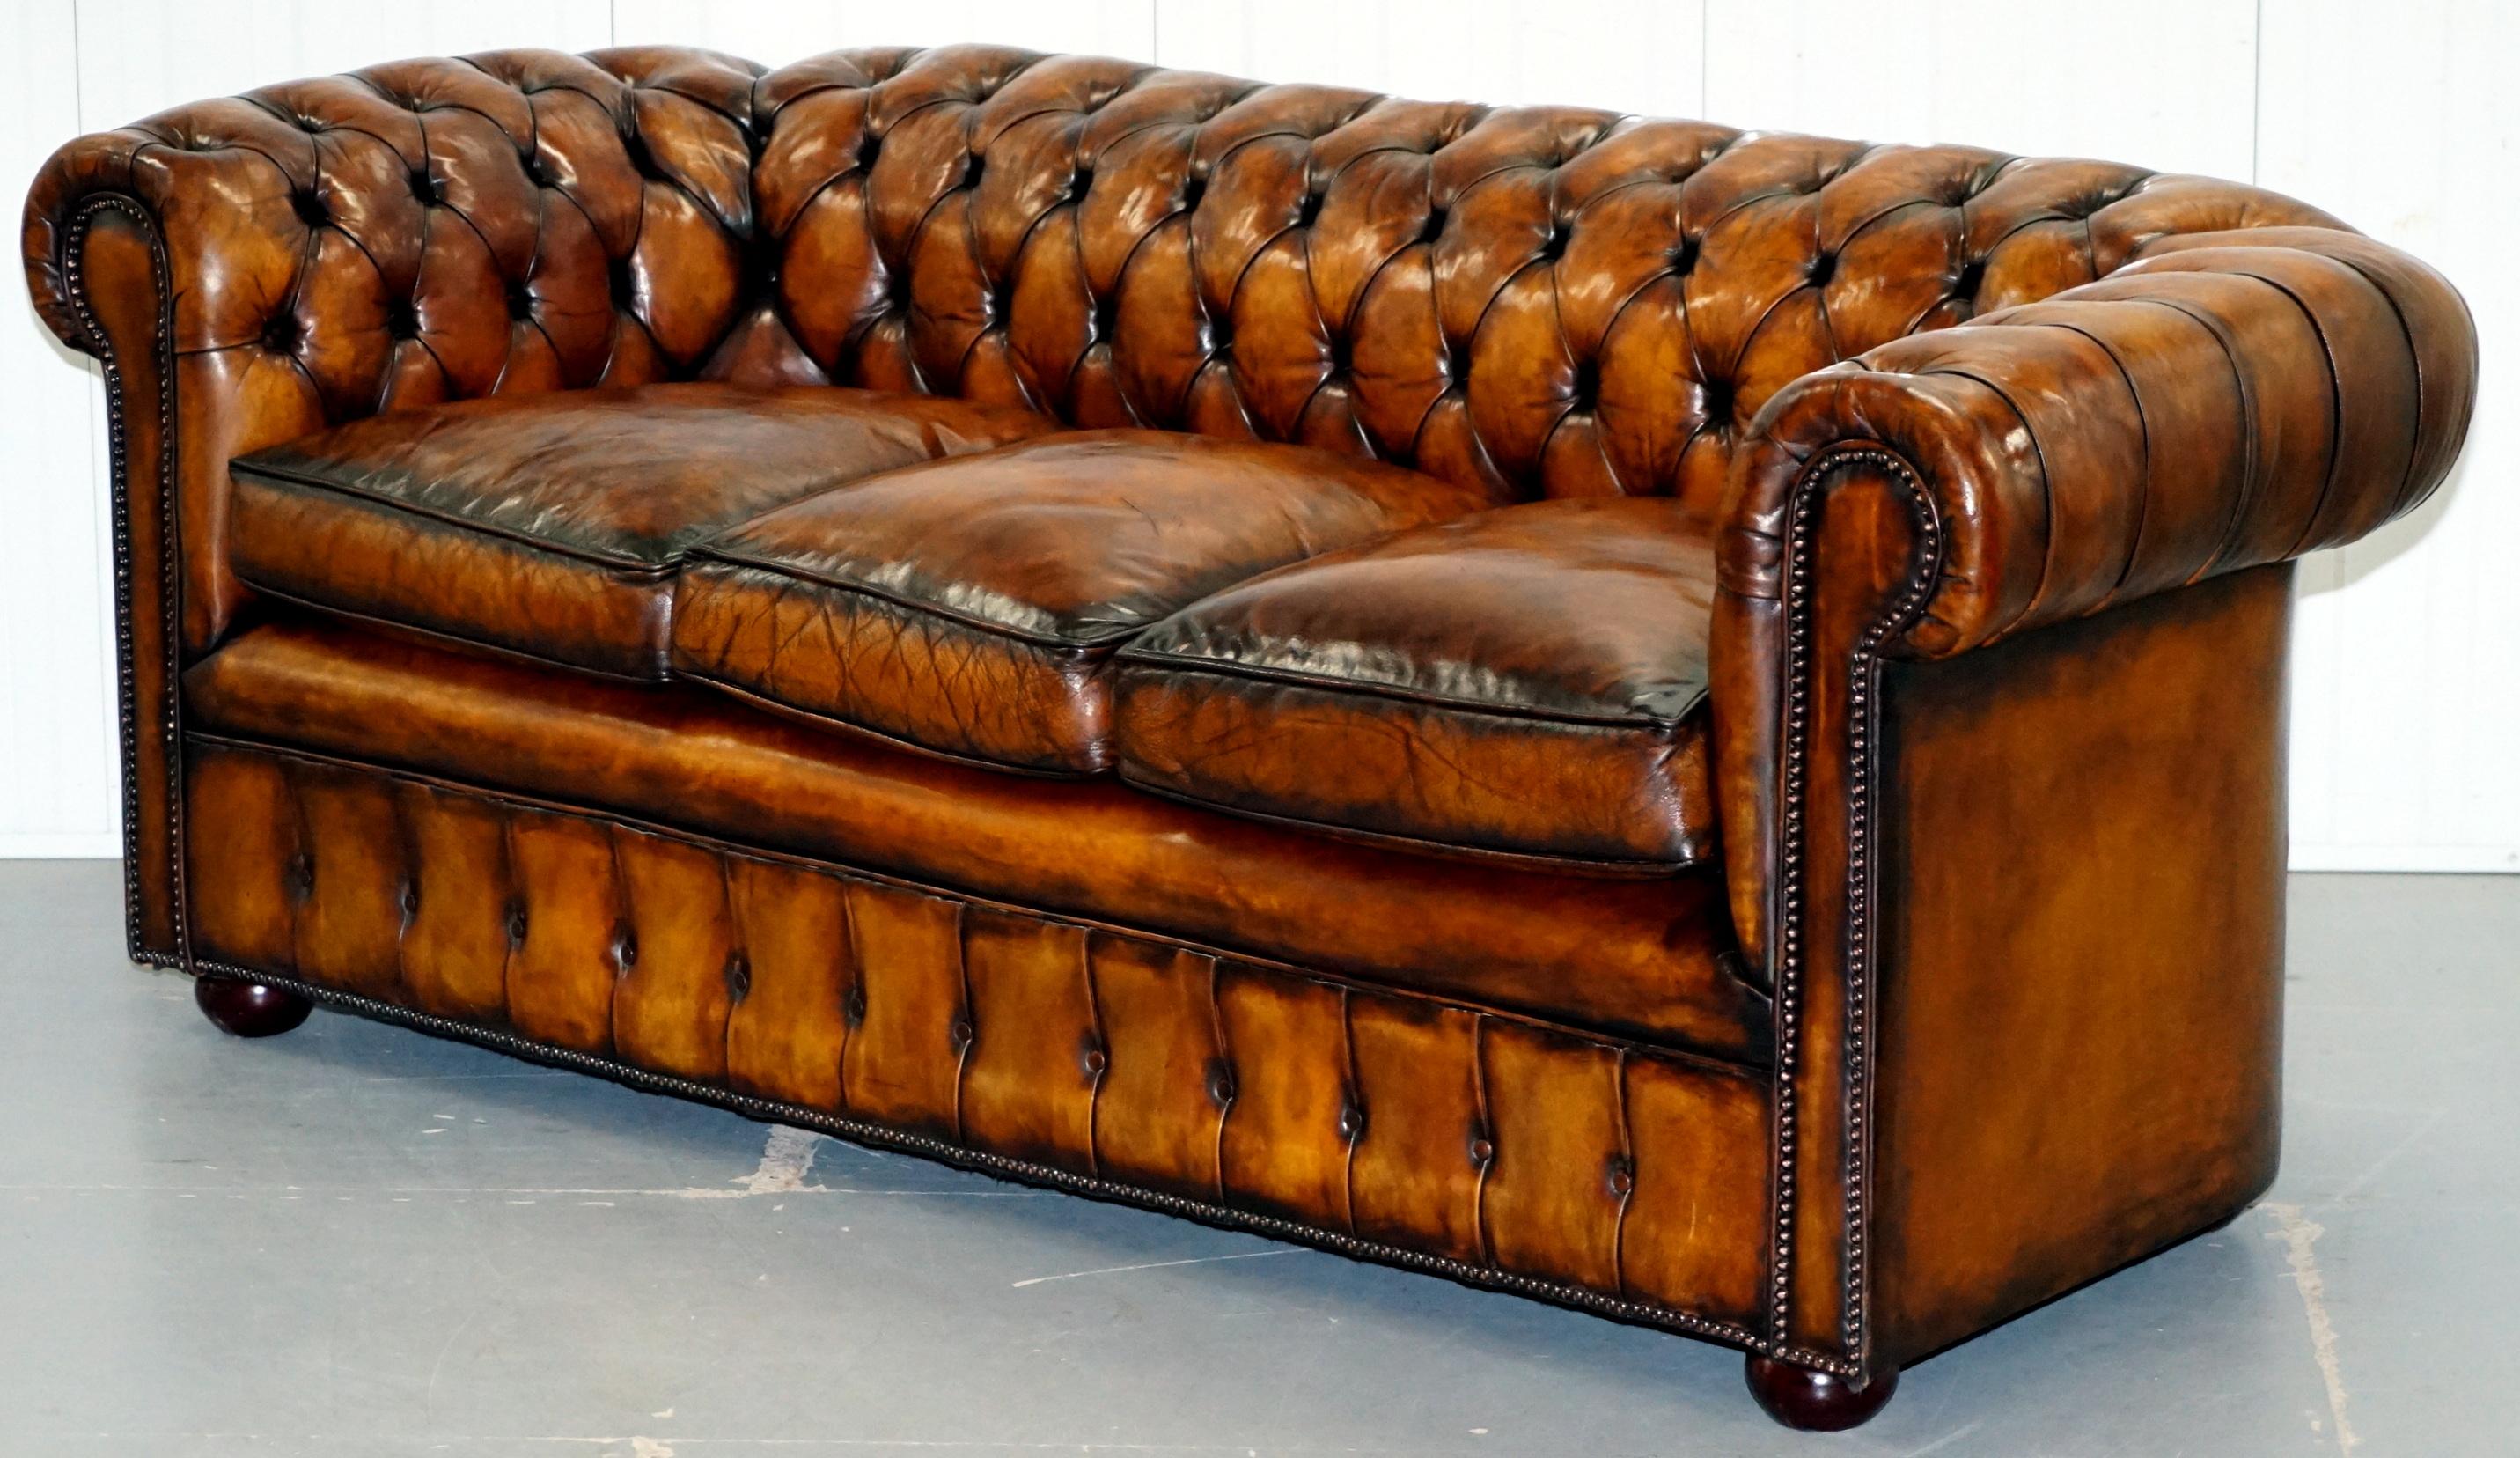 1930s chesterfield